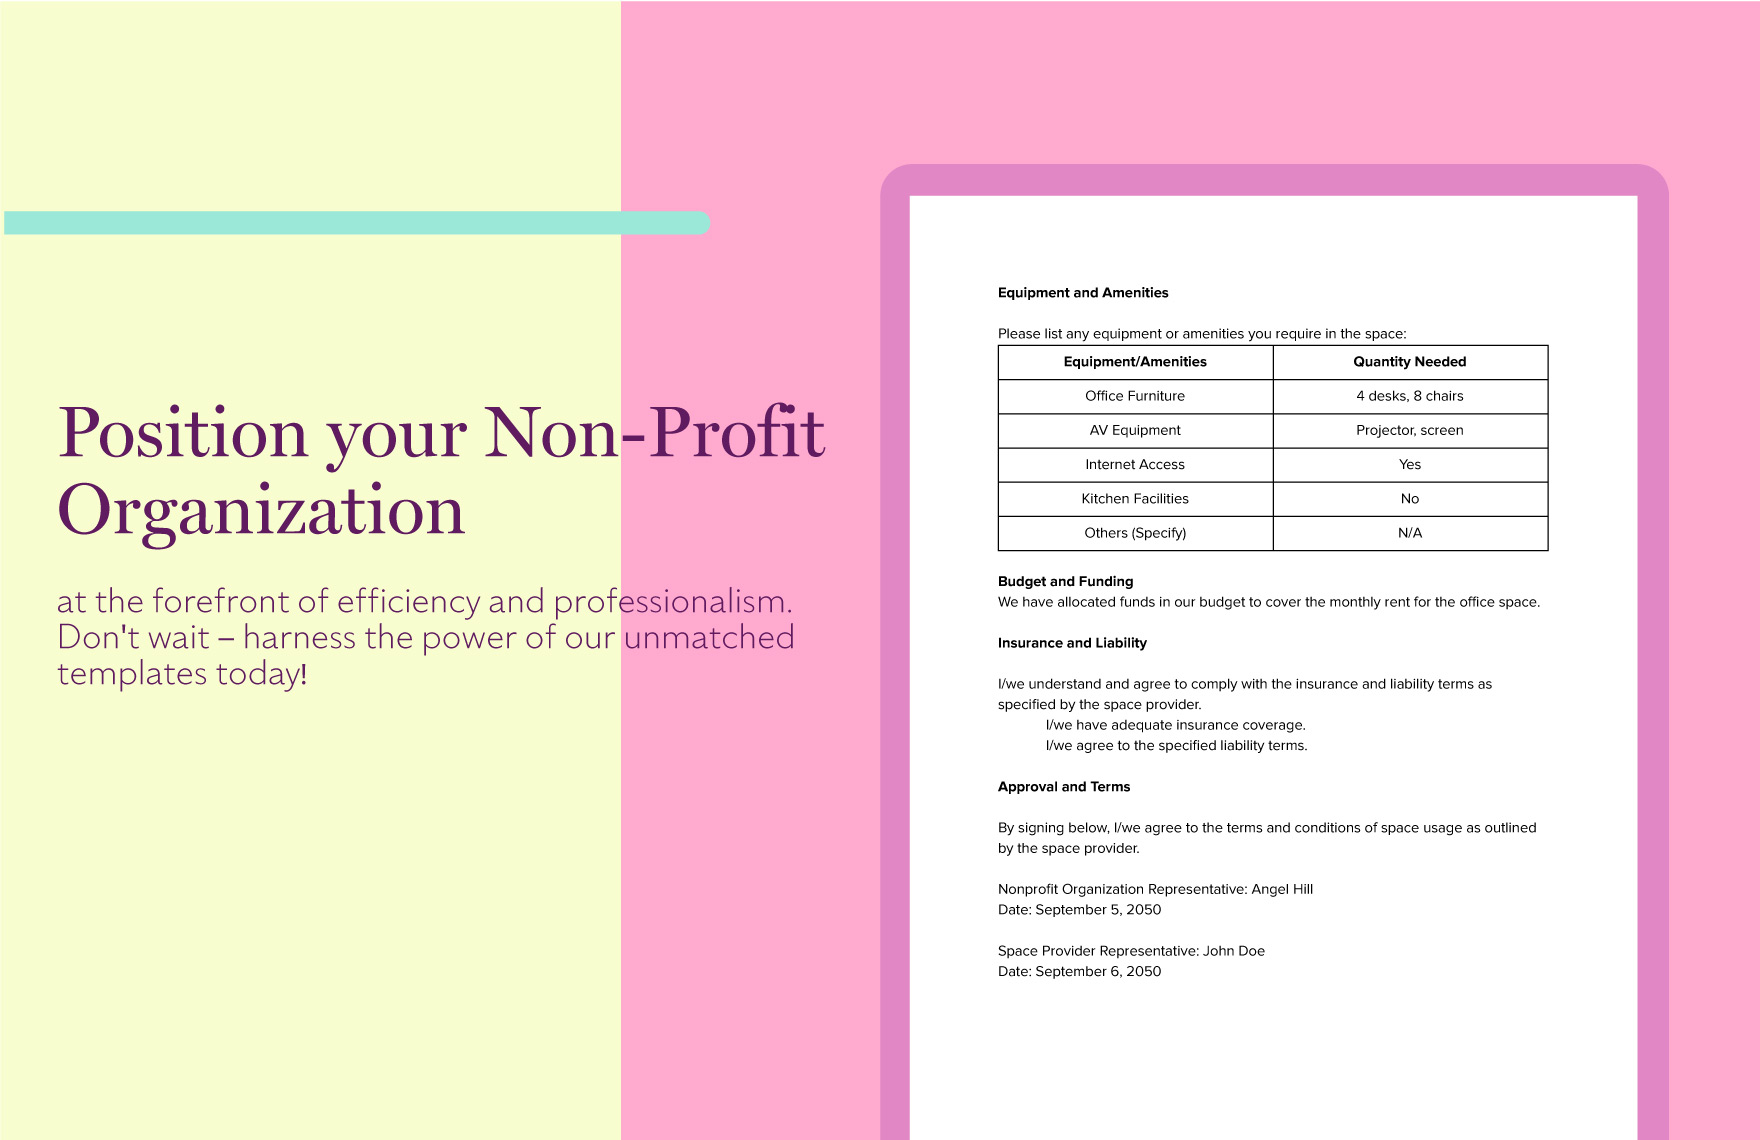 Nonprofit Organization Office Space Request Form Template